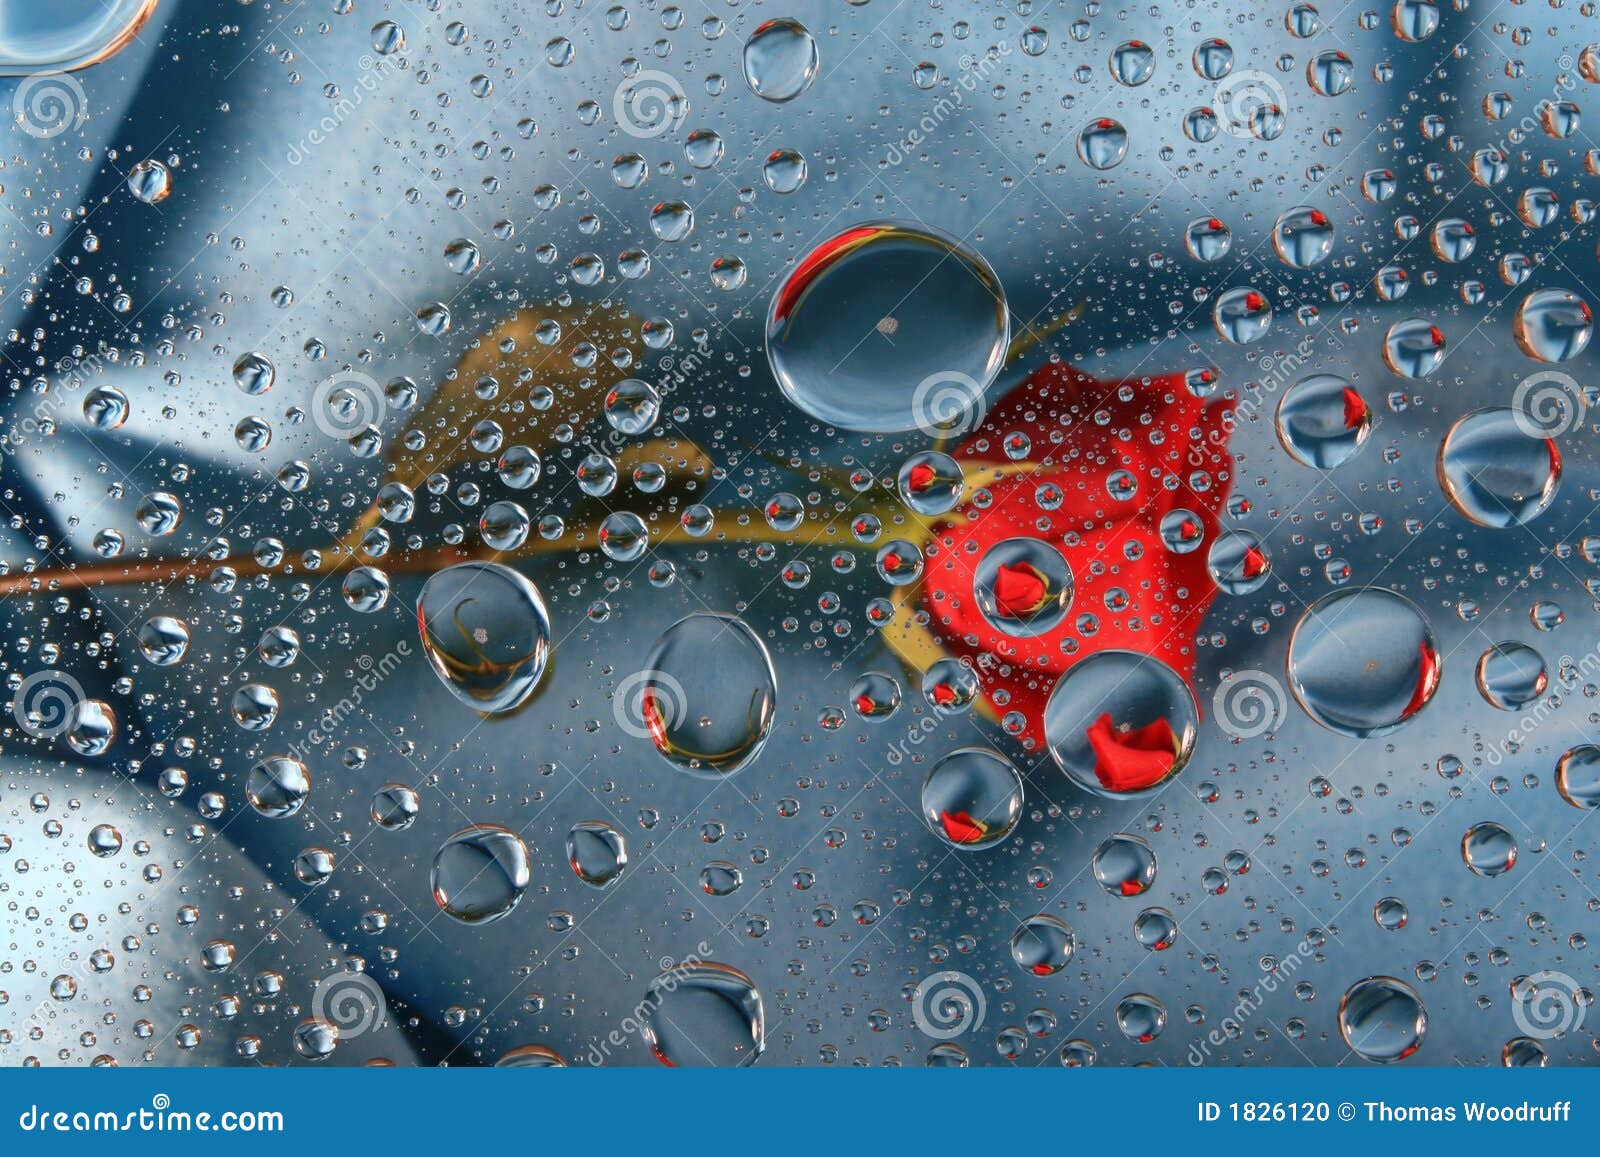 Red rose in water drops 6 stock photo. Image of stem, card - 1826120